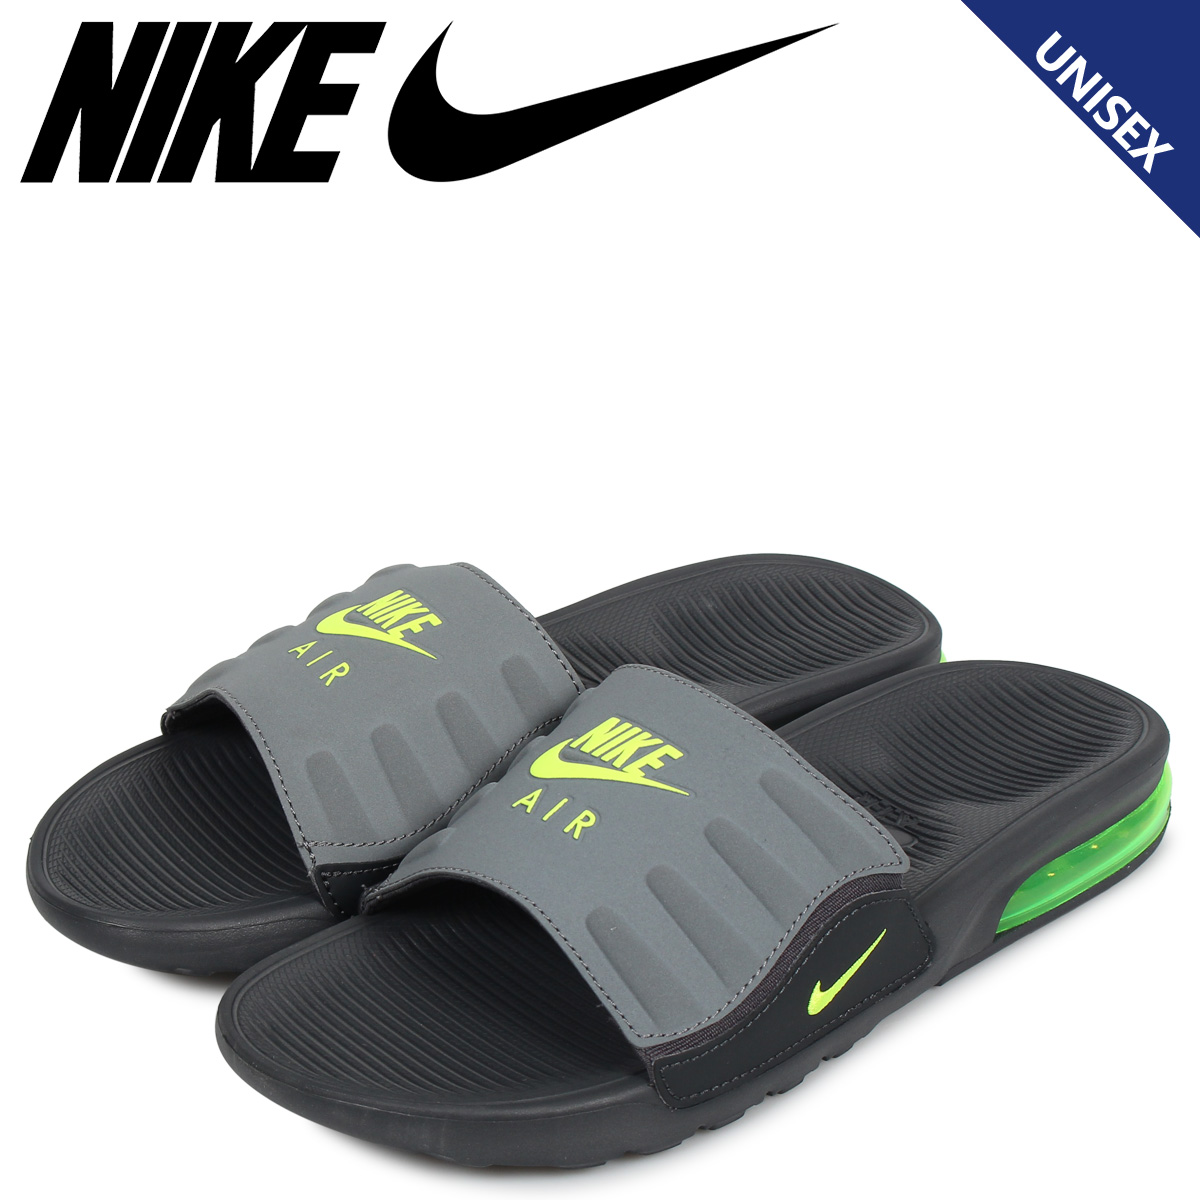 nike air max slippers Online Shopping 